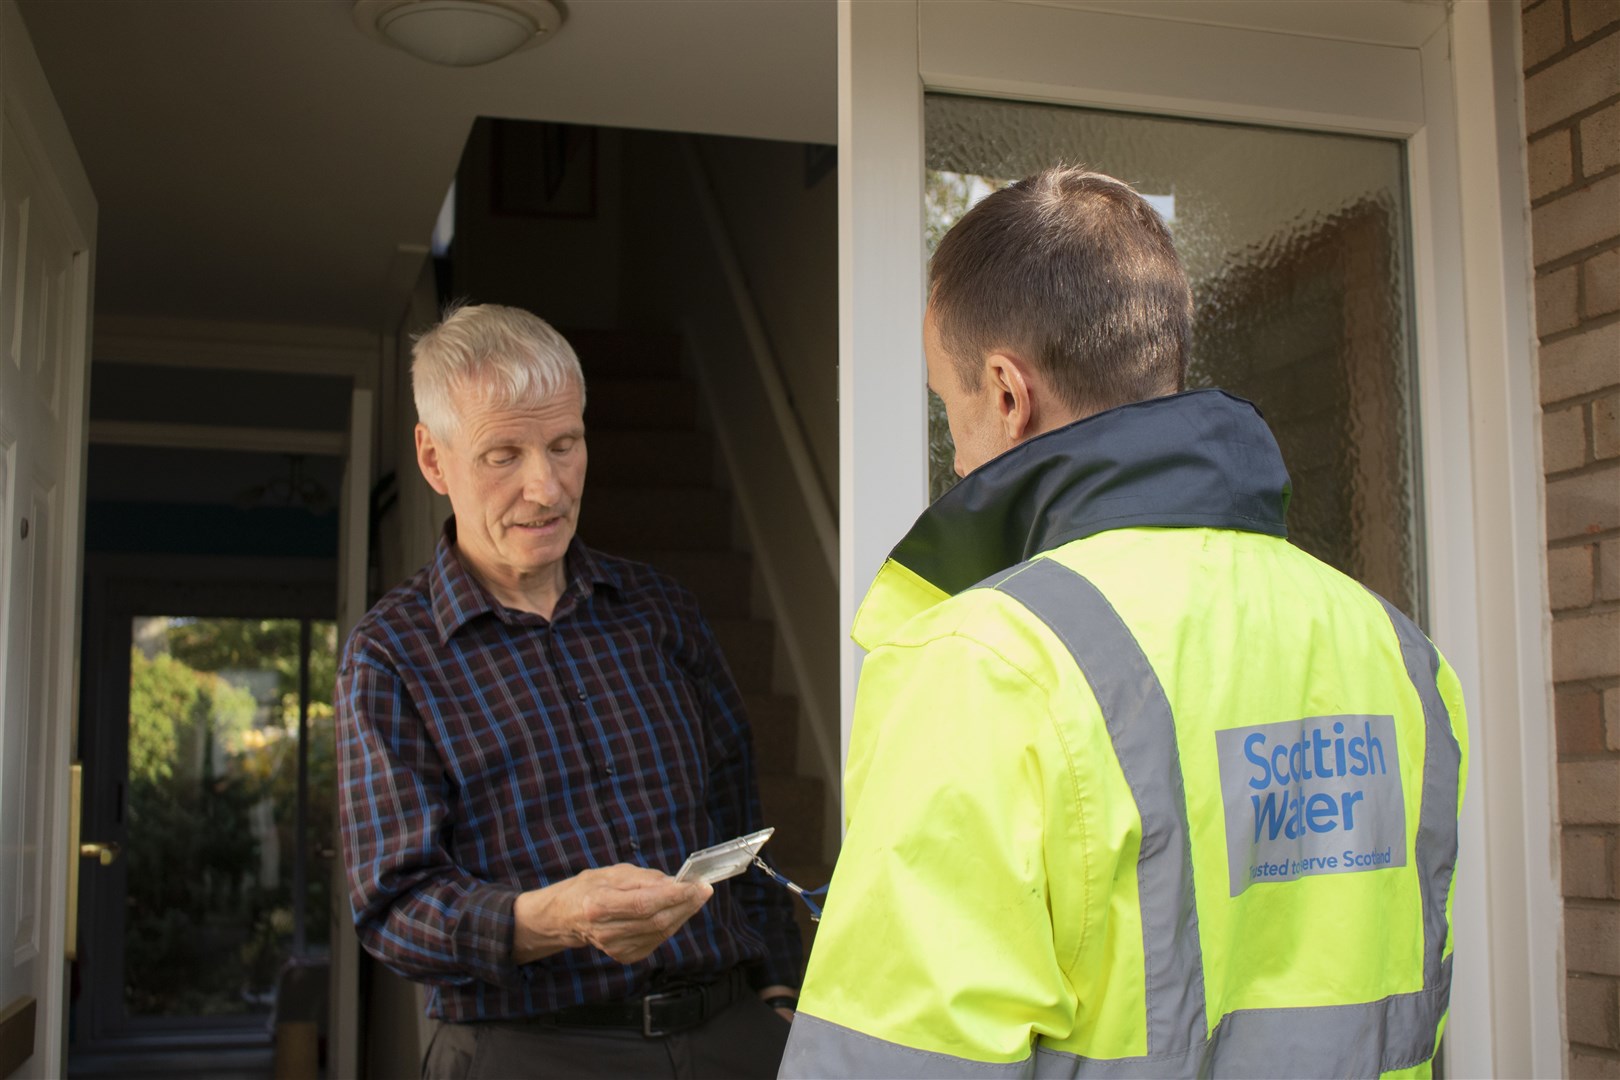 Scottish water has issued advice to customers to avoid bogus callers on darker days. Picture: Scottish Water